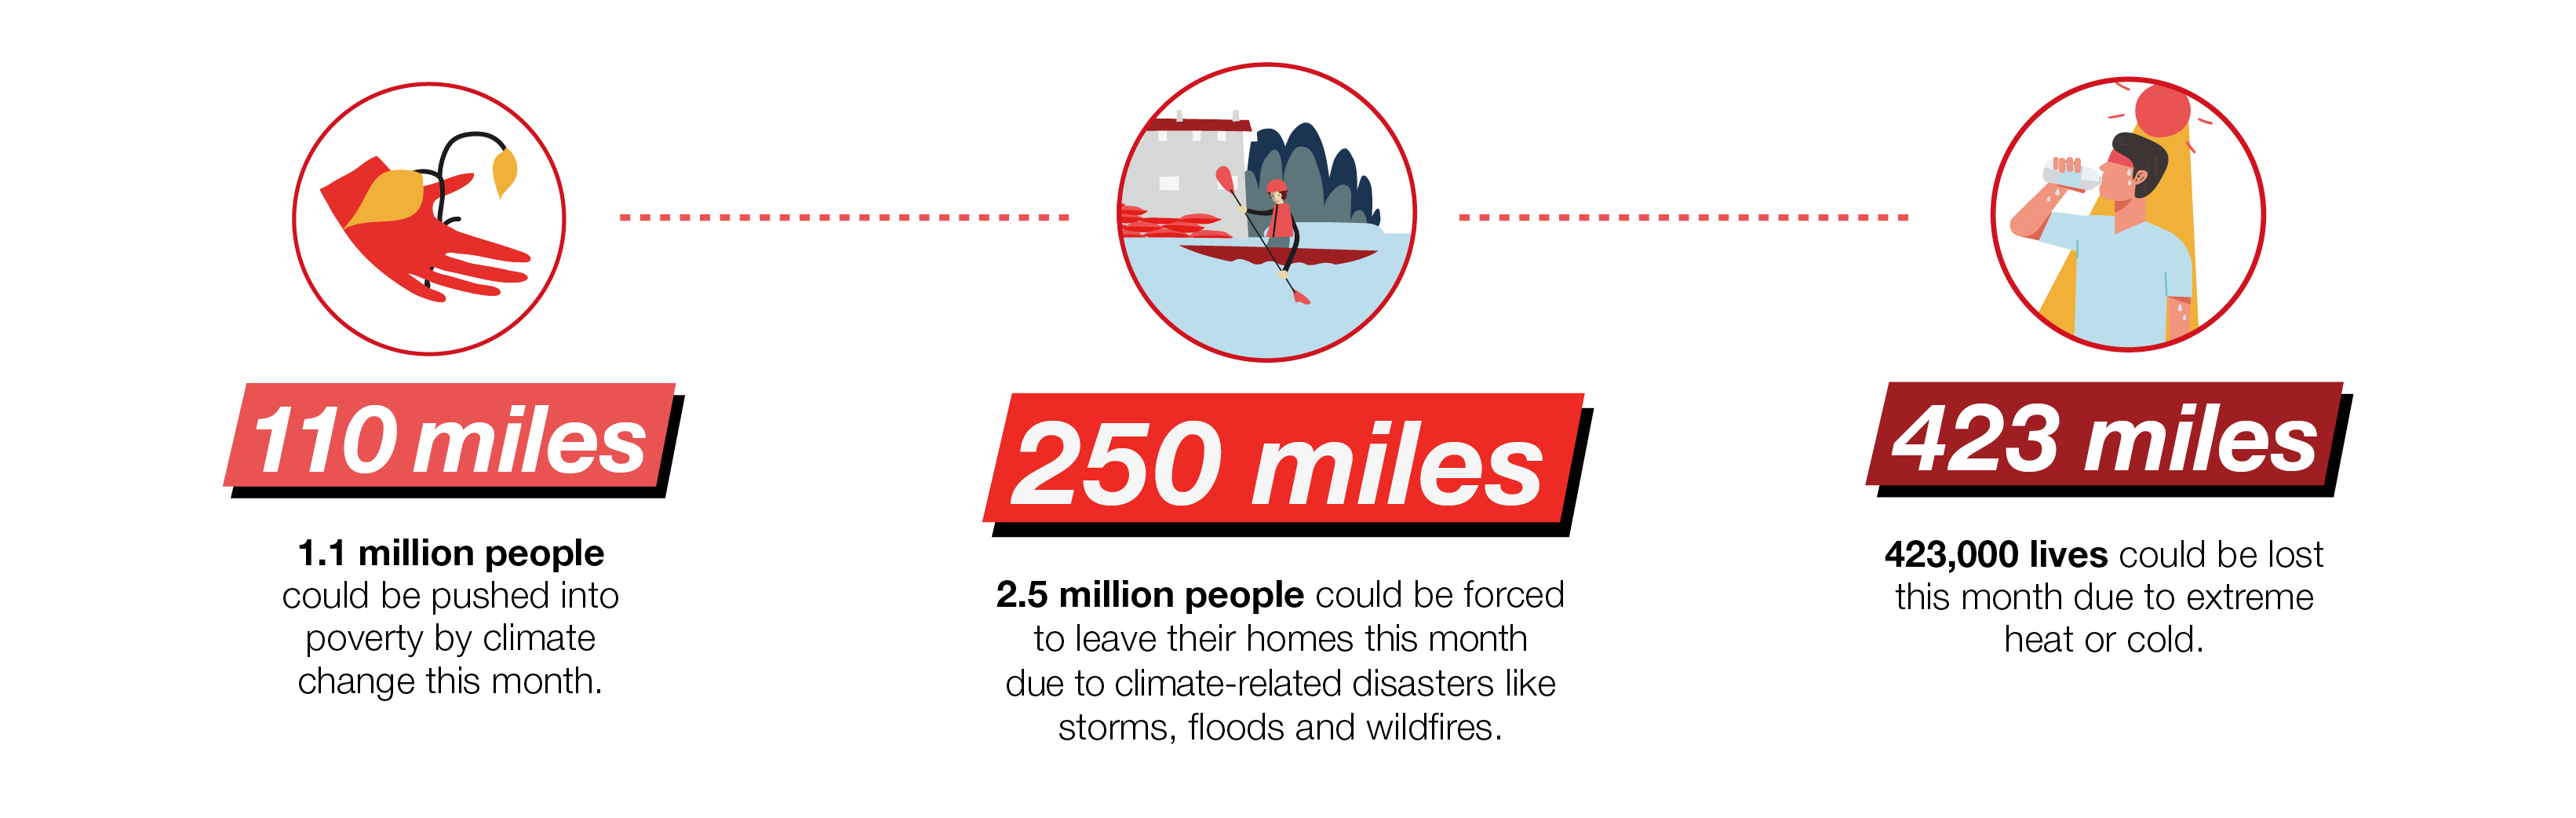 110 miles: 1.1 million people could be pushed into poverty by climate change this month. 250 miles: 2.5 million people could be forced to leave their homes this month due to climate-related disasters like storms, floods and wildfires. 423 miles: 423,000 lives could be lost this month due to extreme heat or cold.